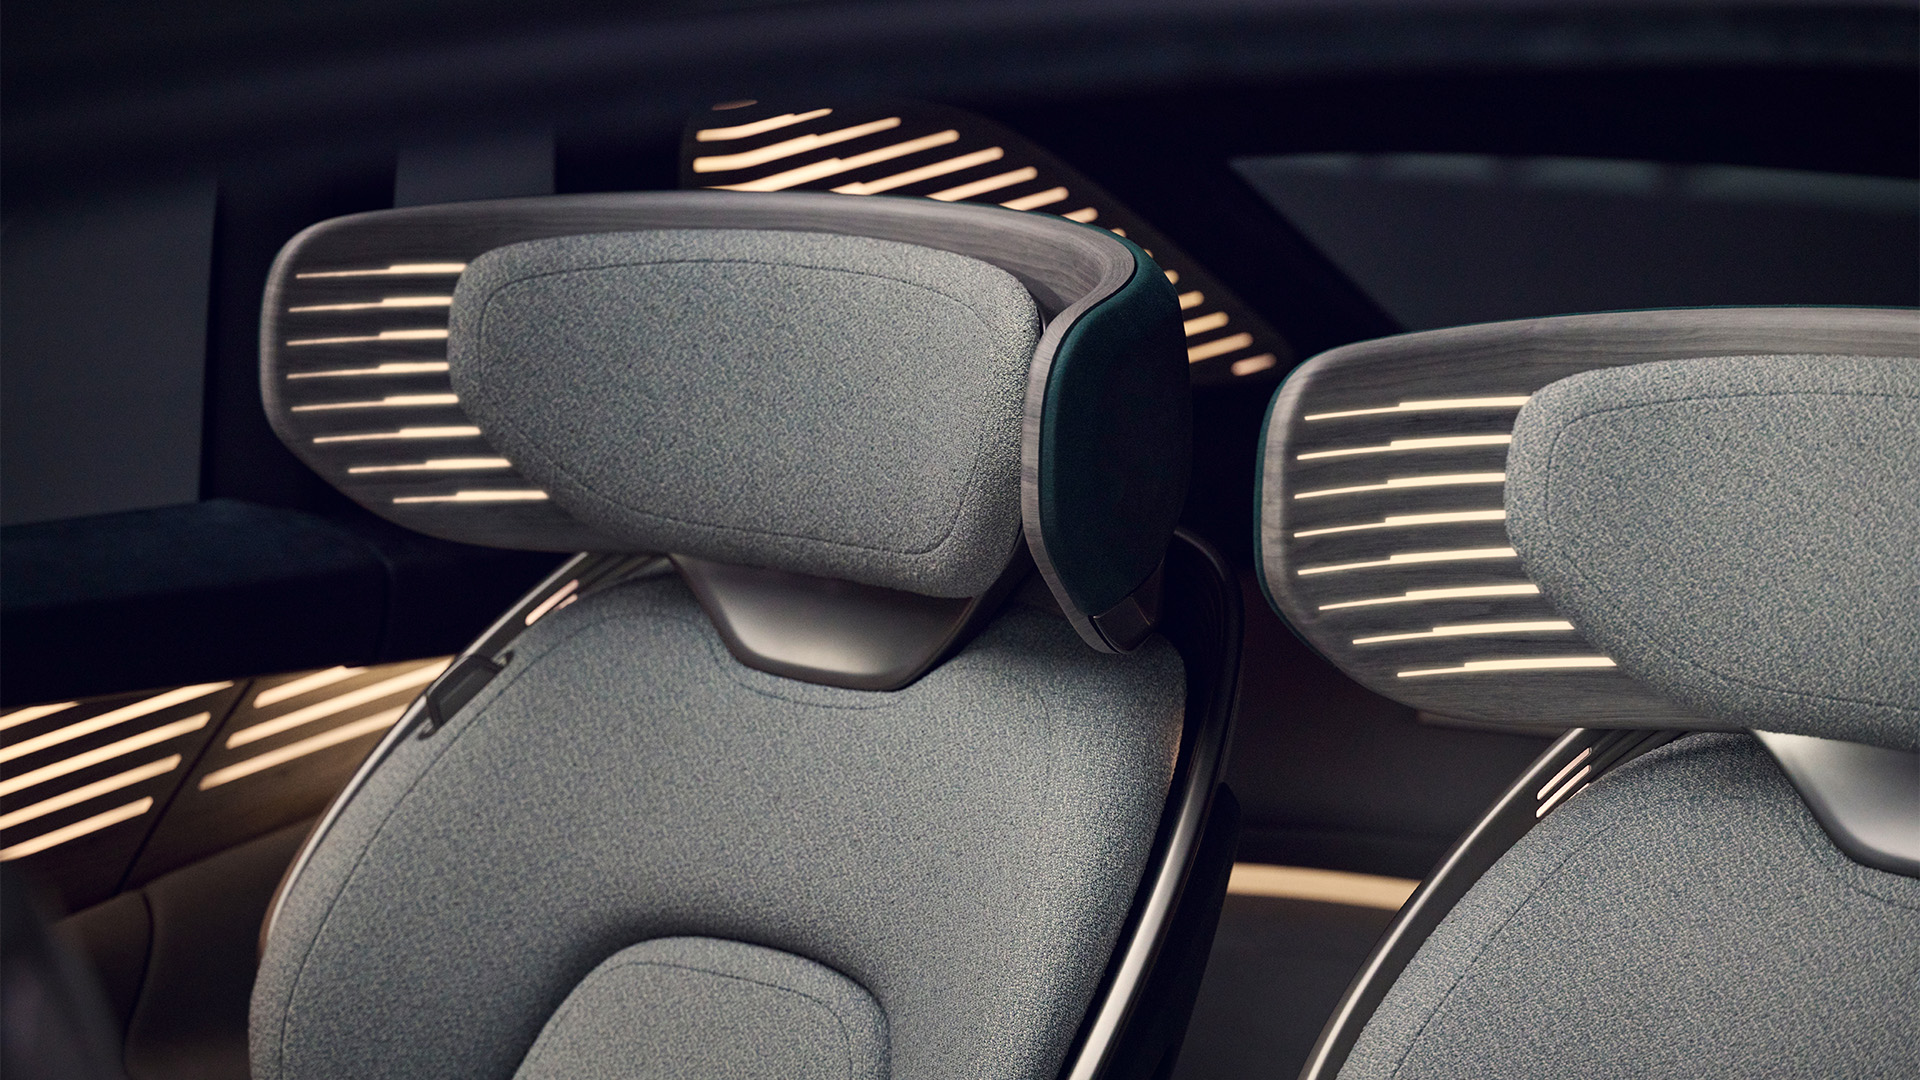 A close-up inside the Audi urbansphere concept of two seats with light elements in the headrest area.